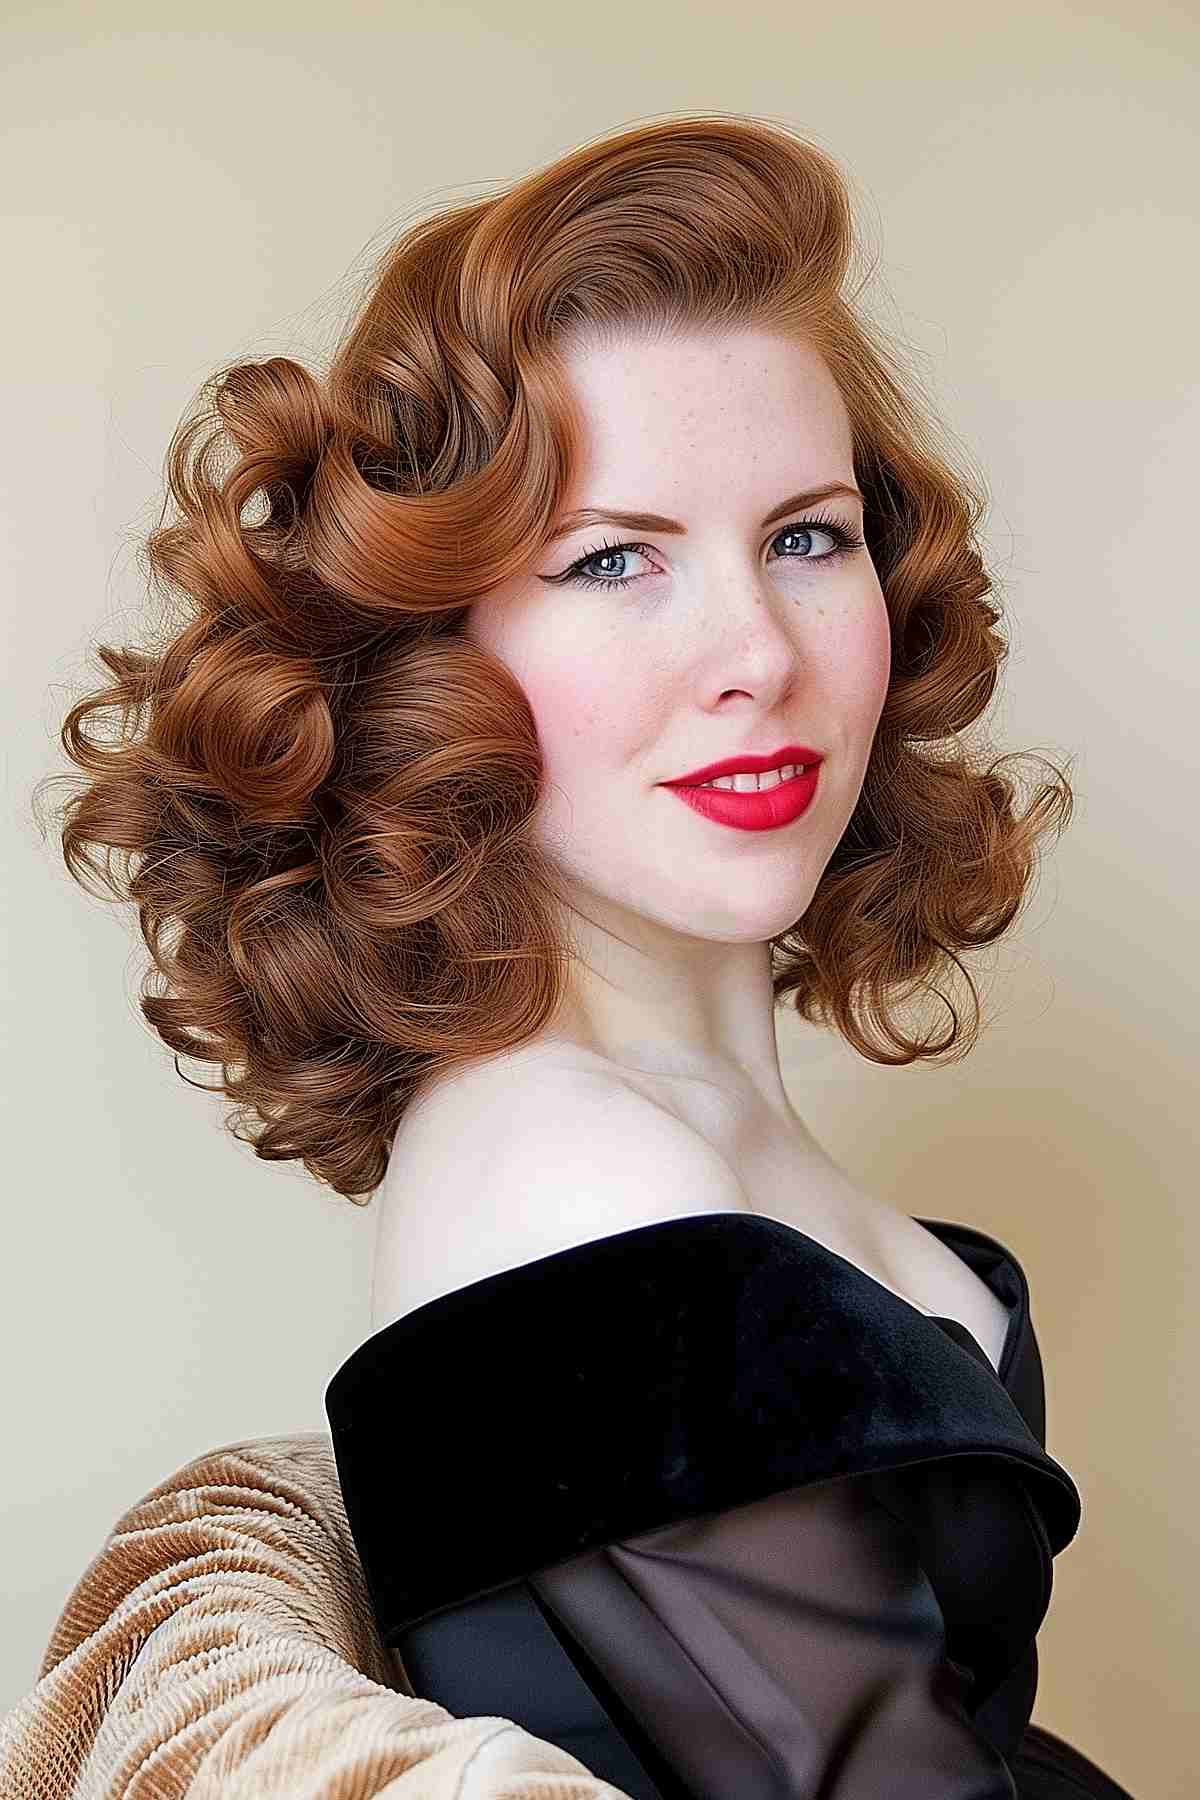 Classic 60s pin curls hairstyle with voluminous structured curls for vintage elegance.